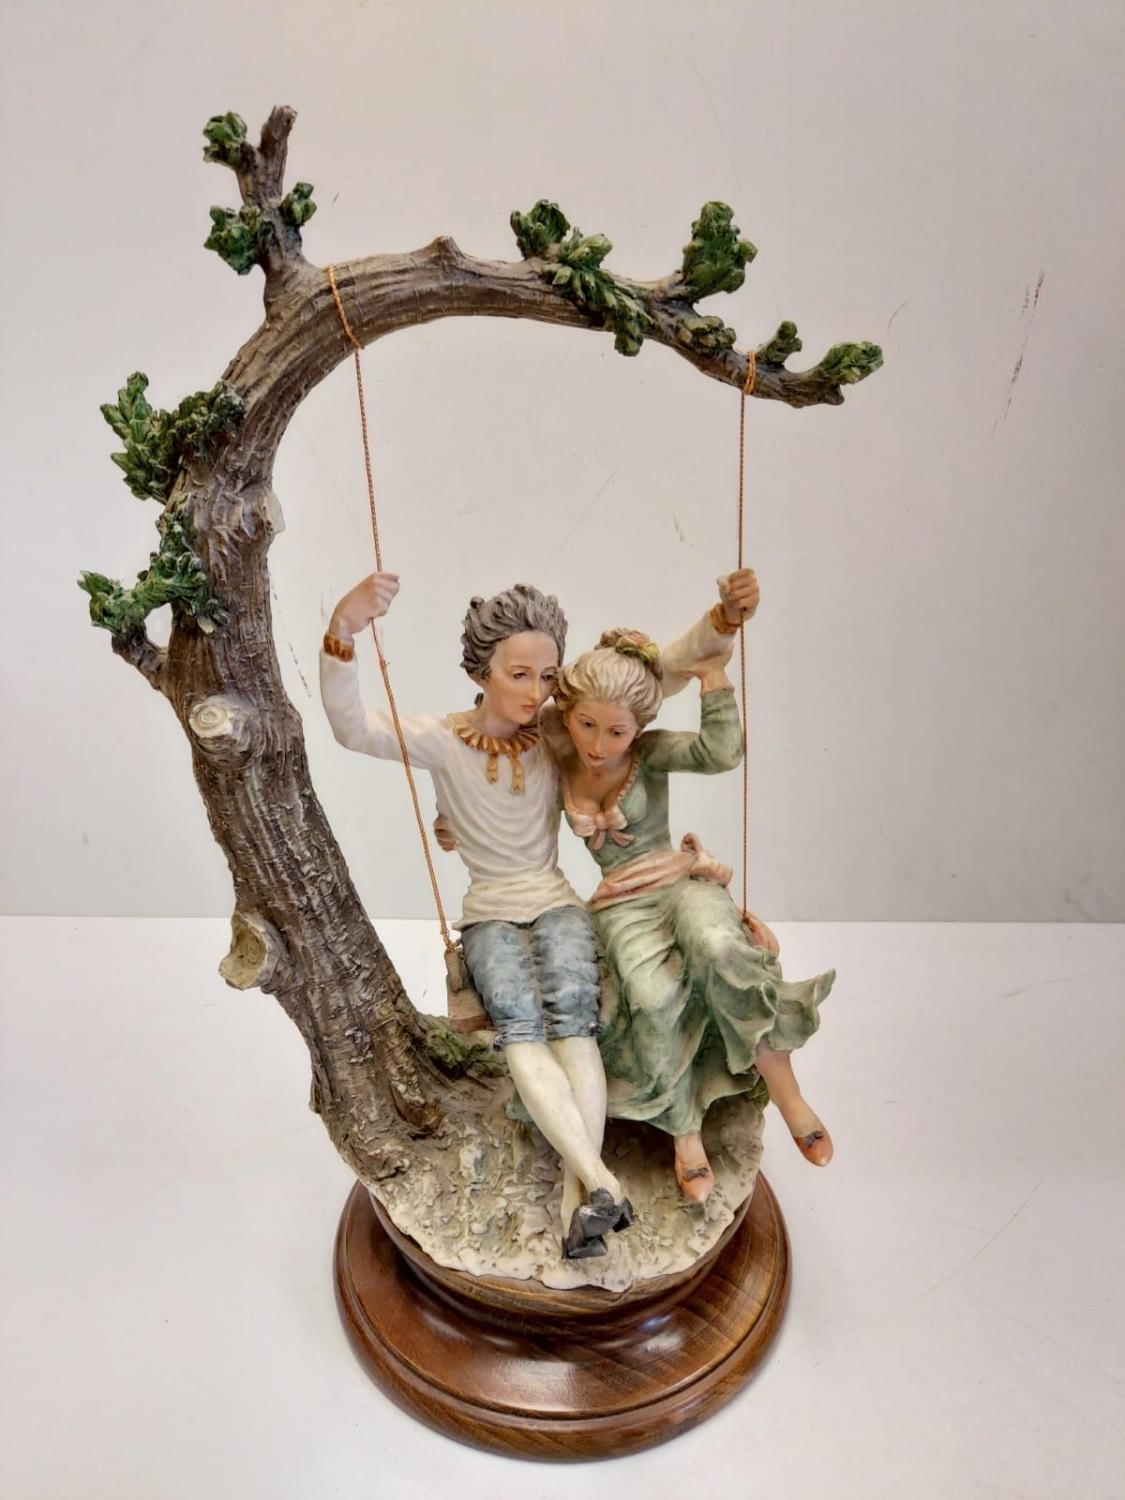 A Giuseppe Armani Capodimonte, 'Lovers on a Swing' figurine. 45cm in height.